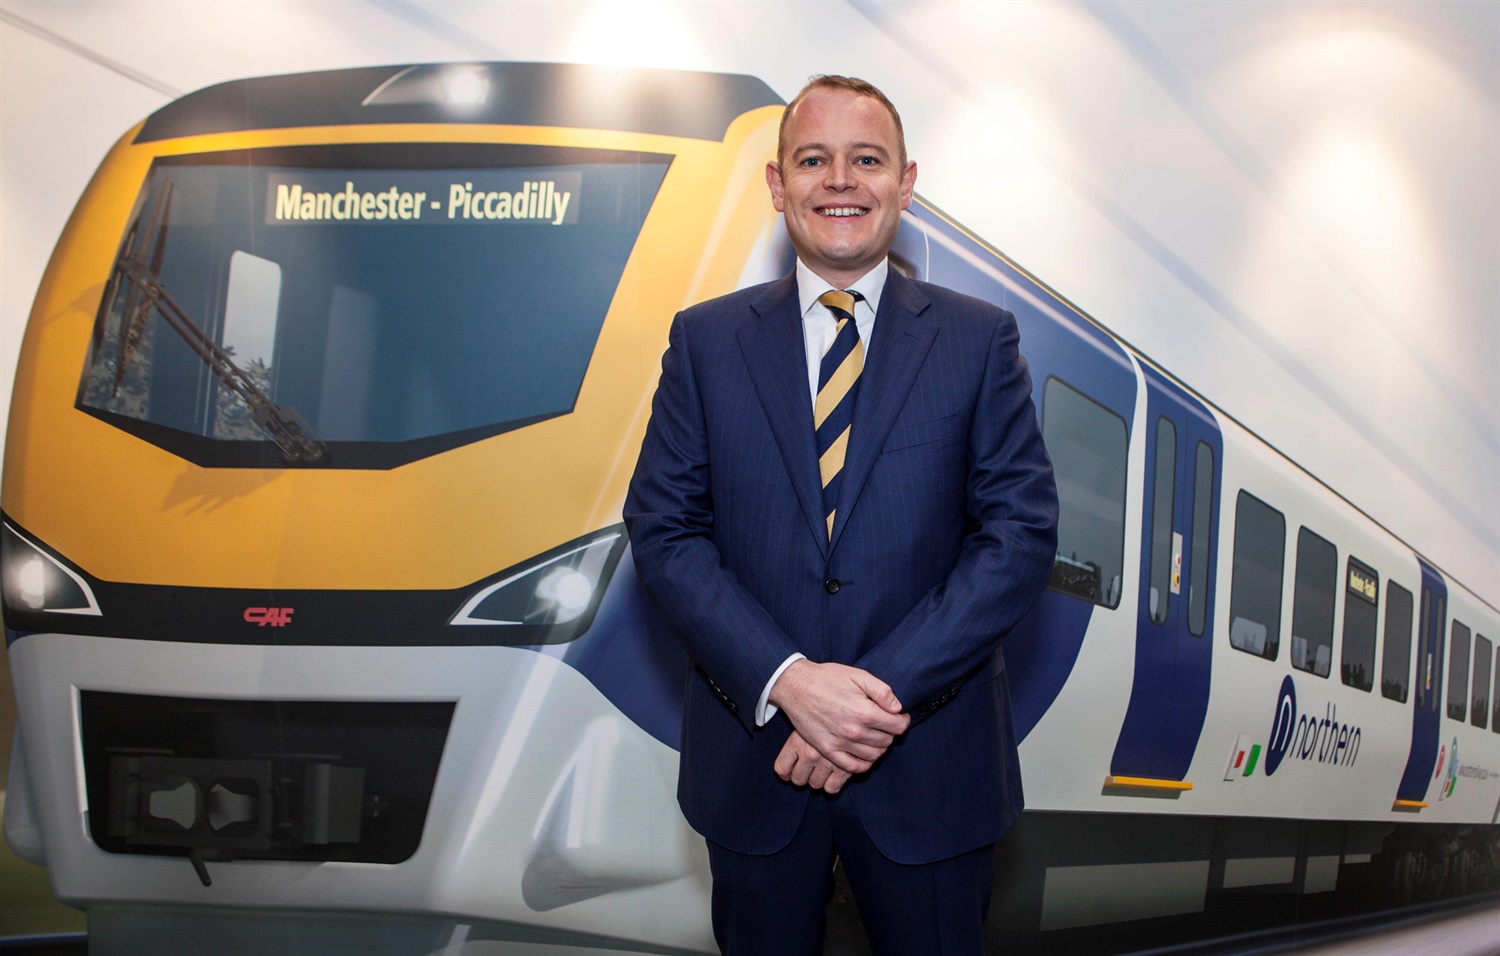 Alex Hynes Managing Director of Northern with a visualisation of a new-look Northern train on the first day of the Northern Franchise